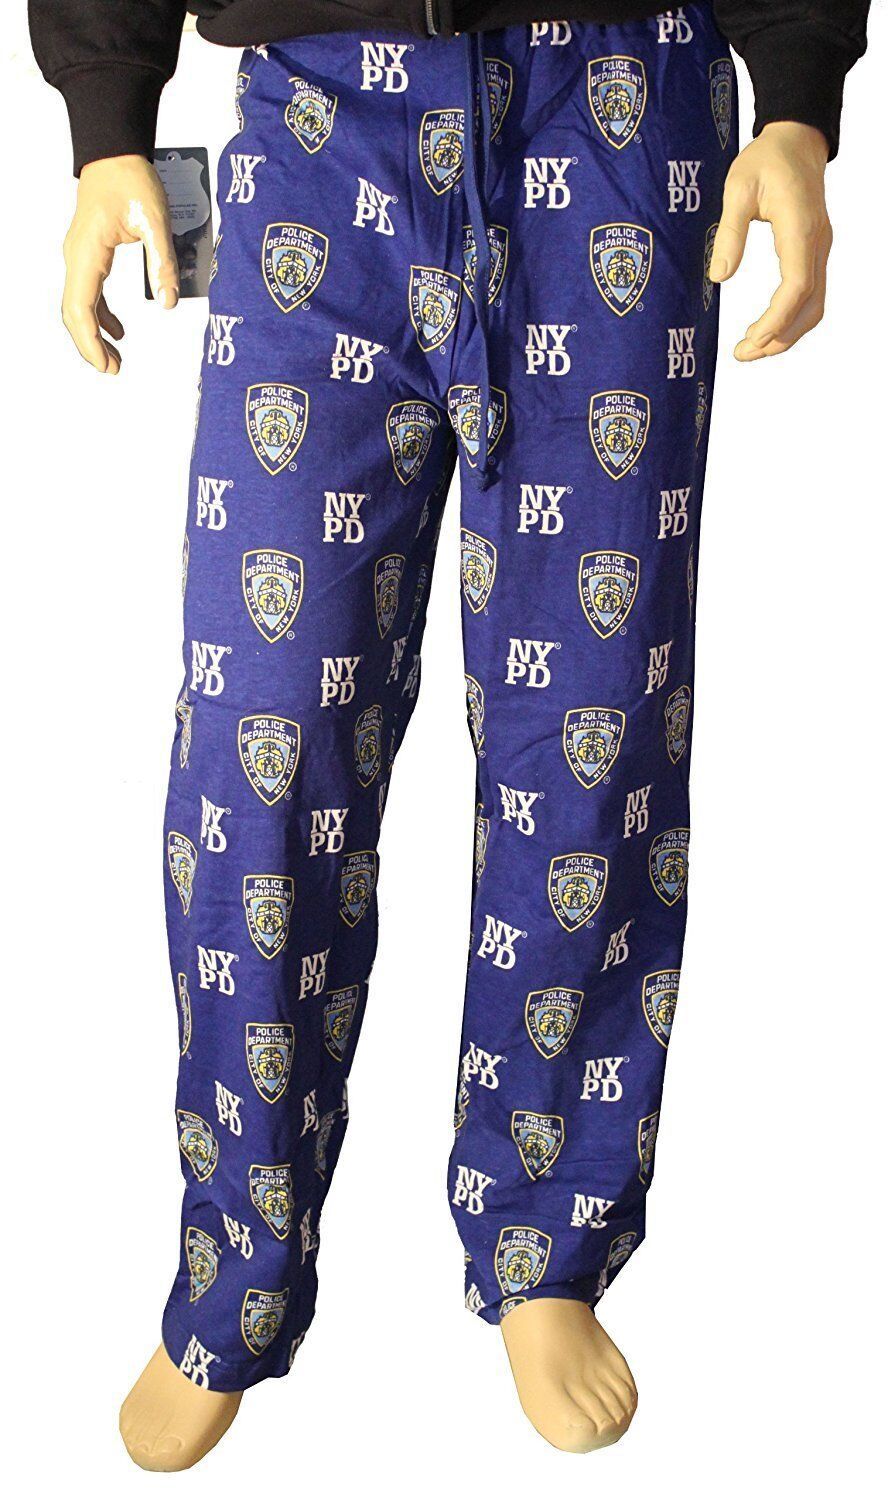 OFFICIALLY LICENSED NYPD BLUE LOUNGE PAJAMA PANTS NEW YORK POLICE DEPARTMENT - $24.99